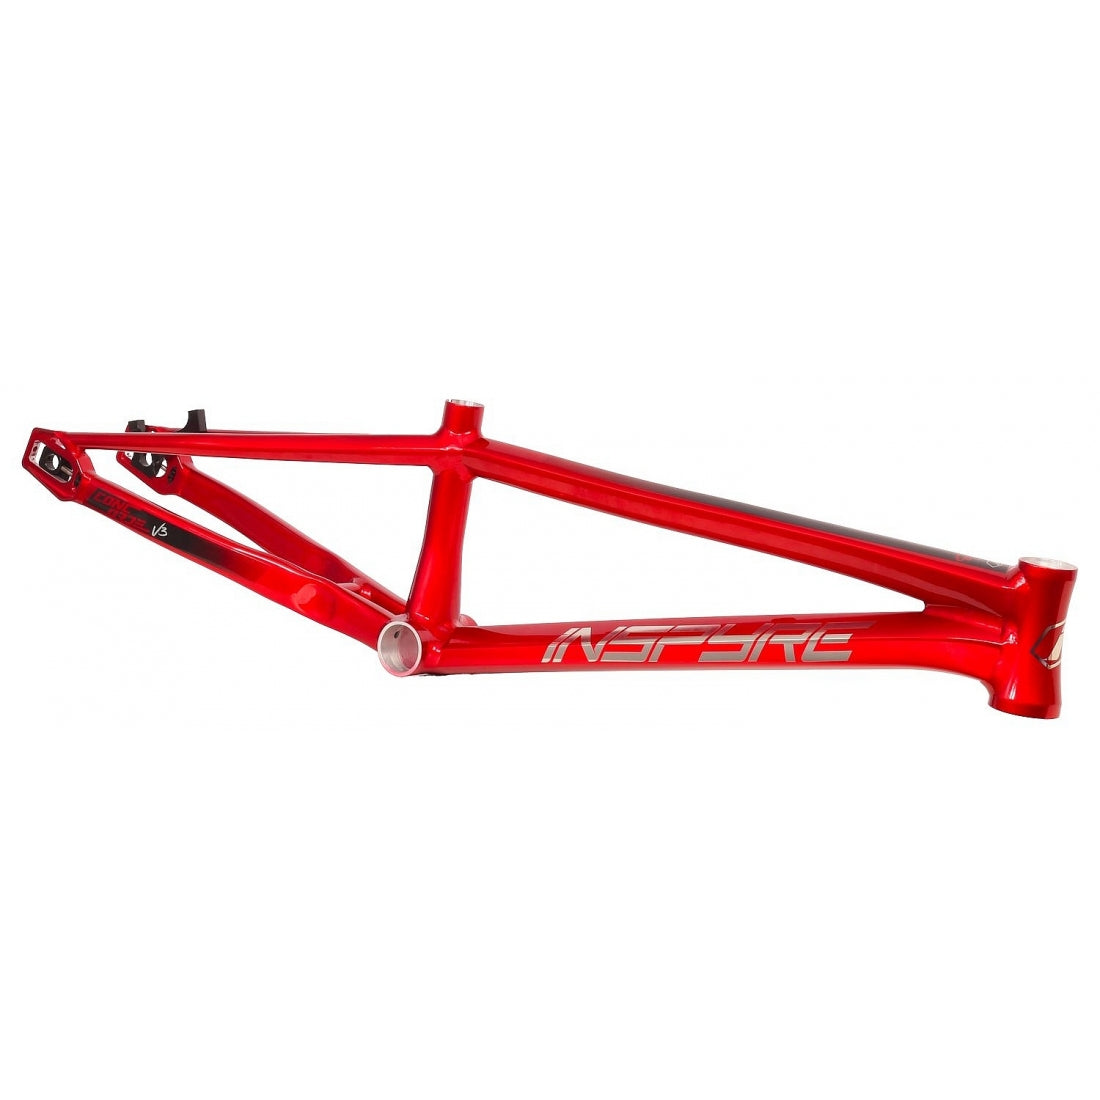 Red Inspyre Concorde V3 Pro XXXL BMX Race frame isolated on a white background.